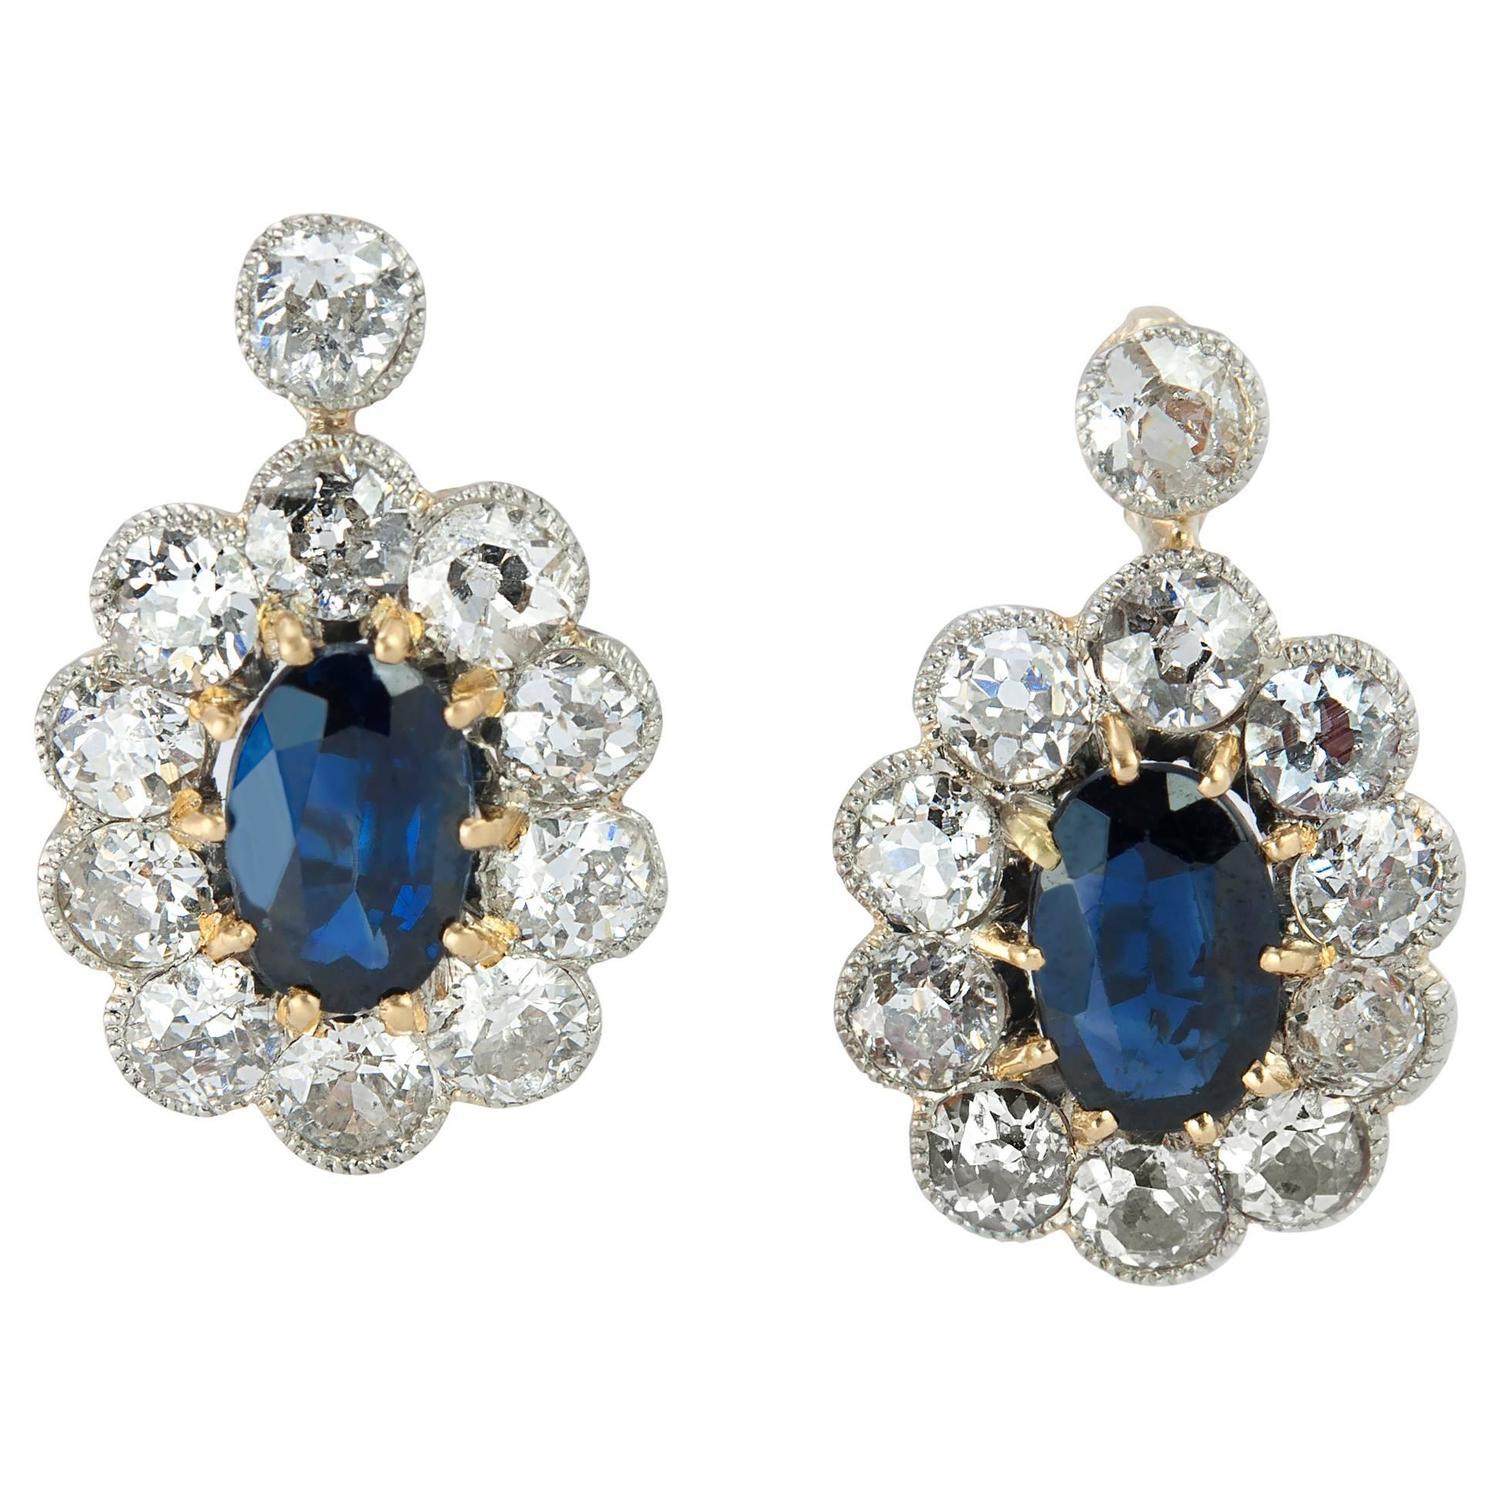 Victorian Sapphire and Diamond Antique Earrings For Sale at 1stdibs